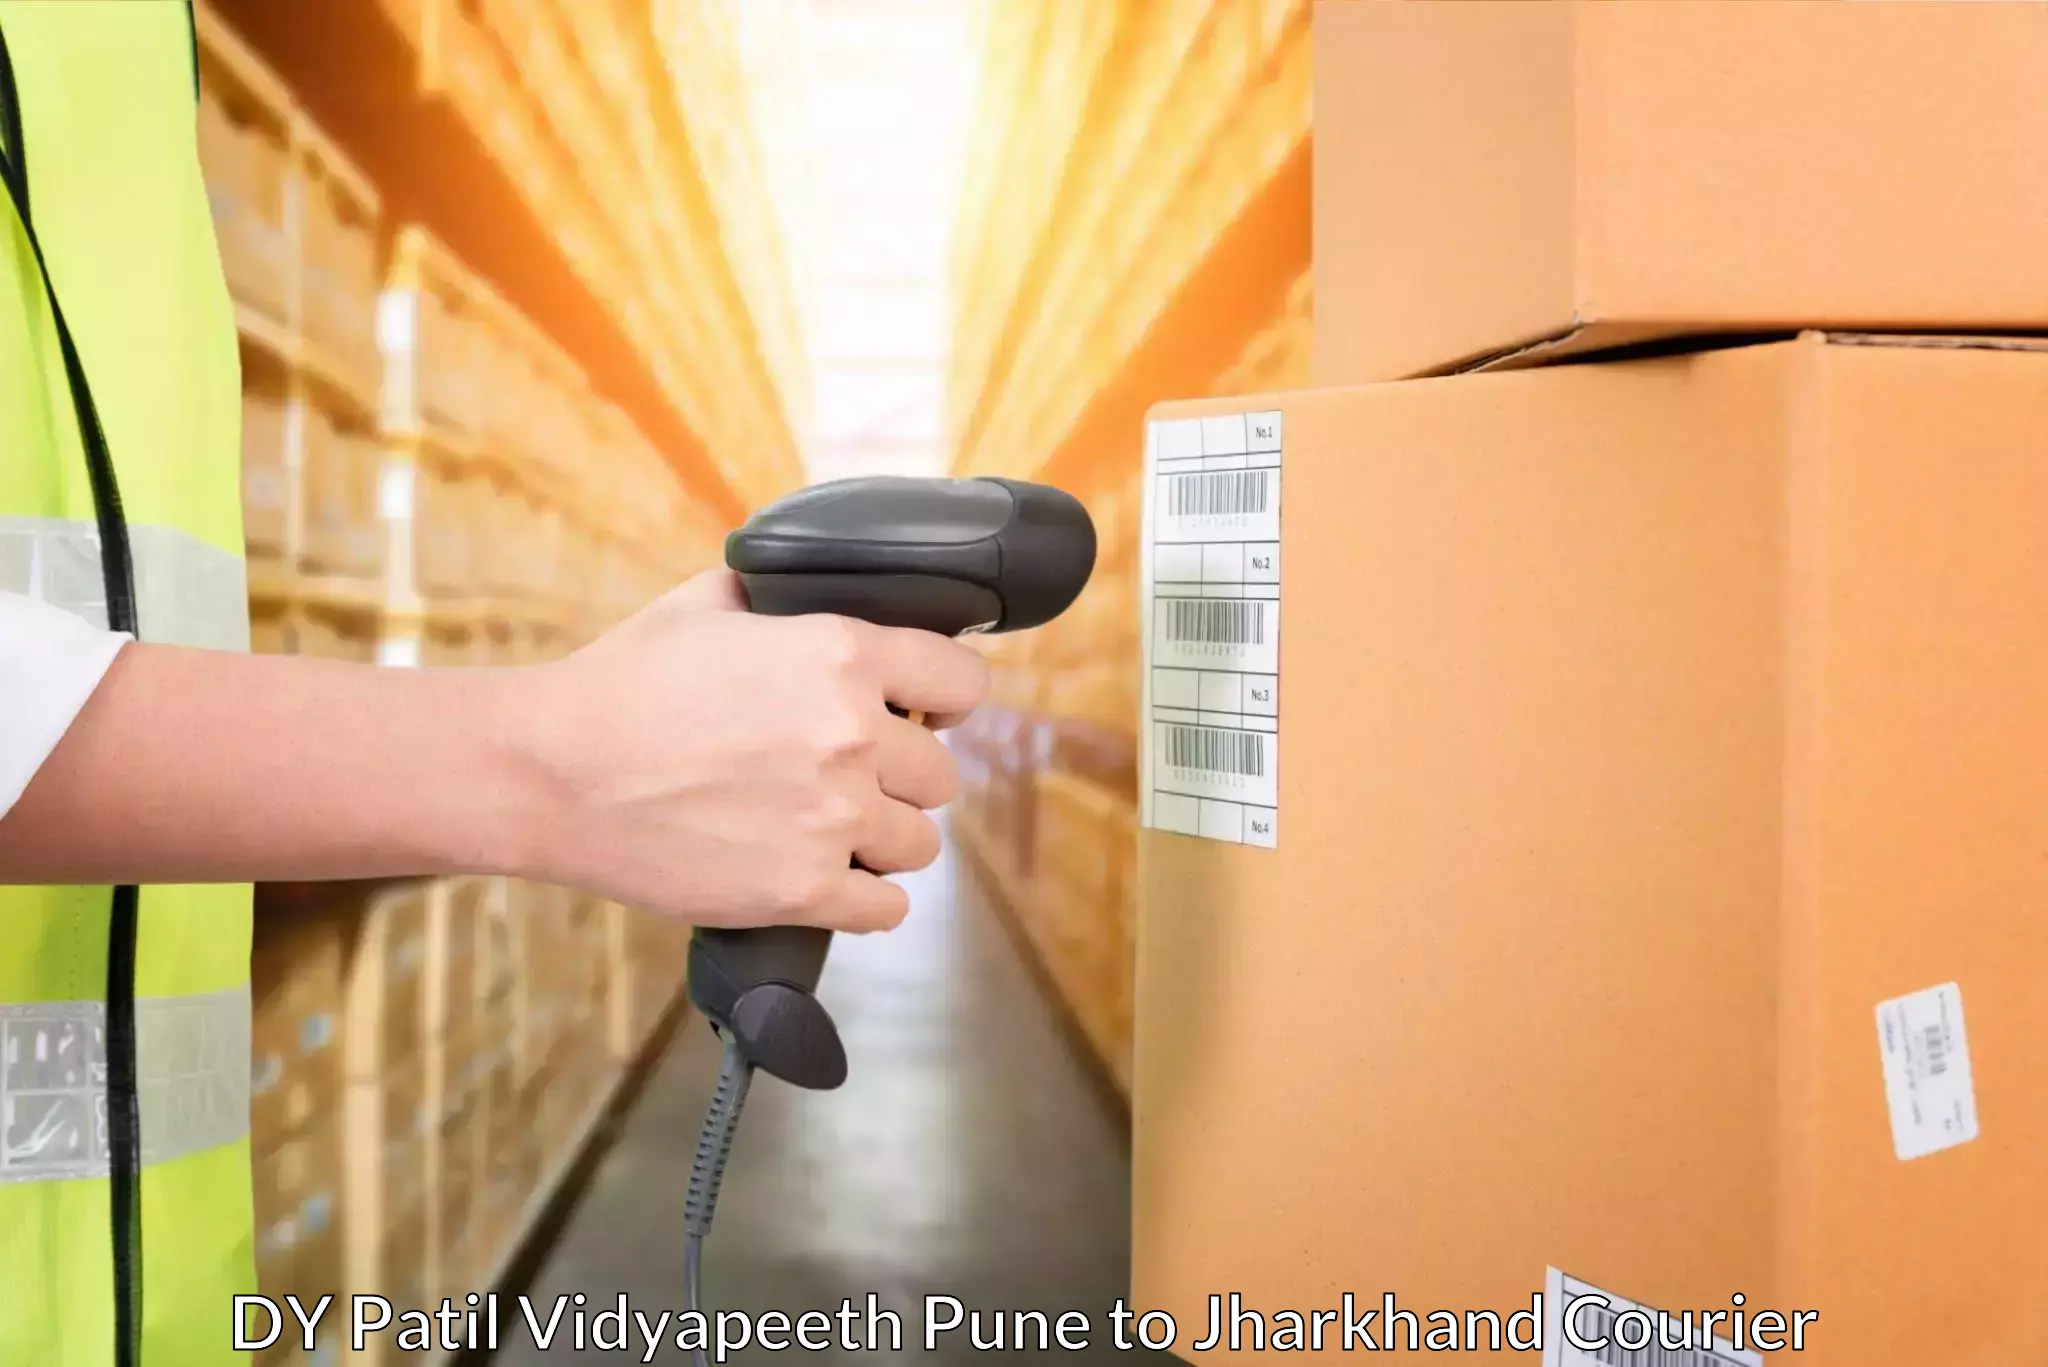 Rapid freight solutions DY Patil Vidyapeeth Pune to Chandil